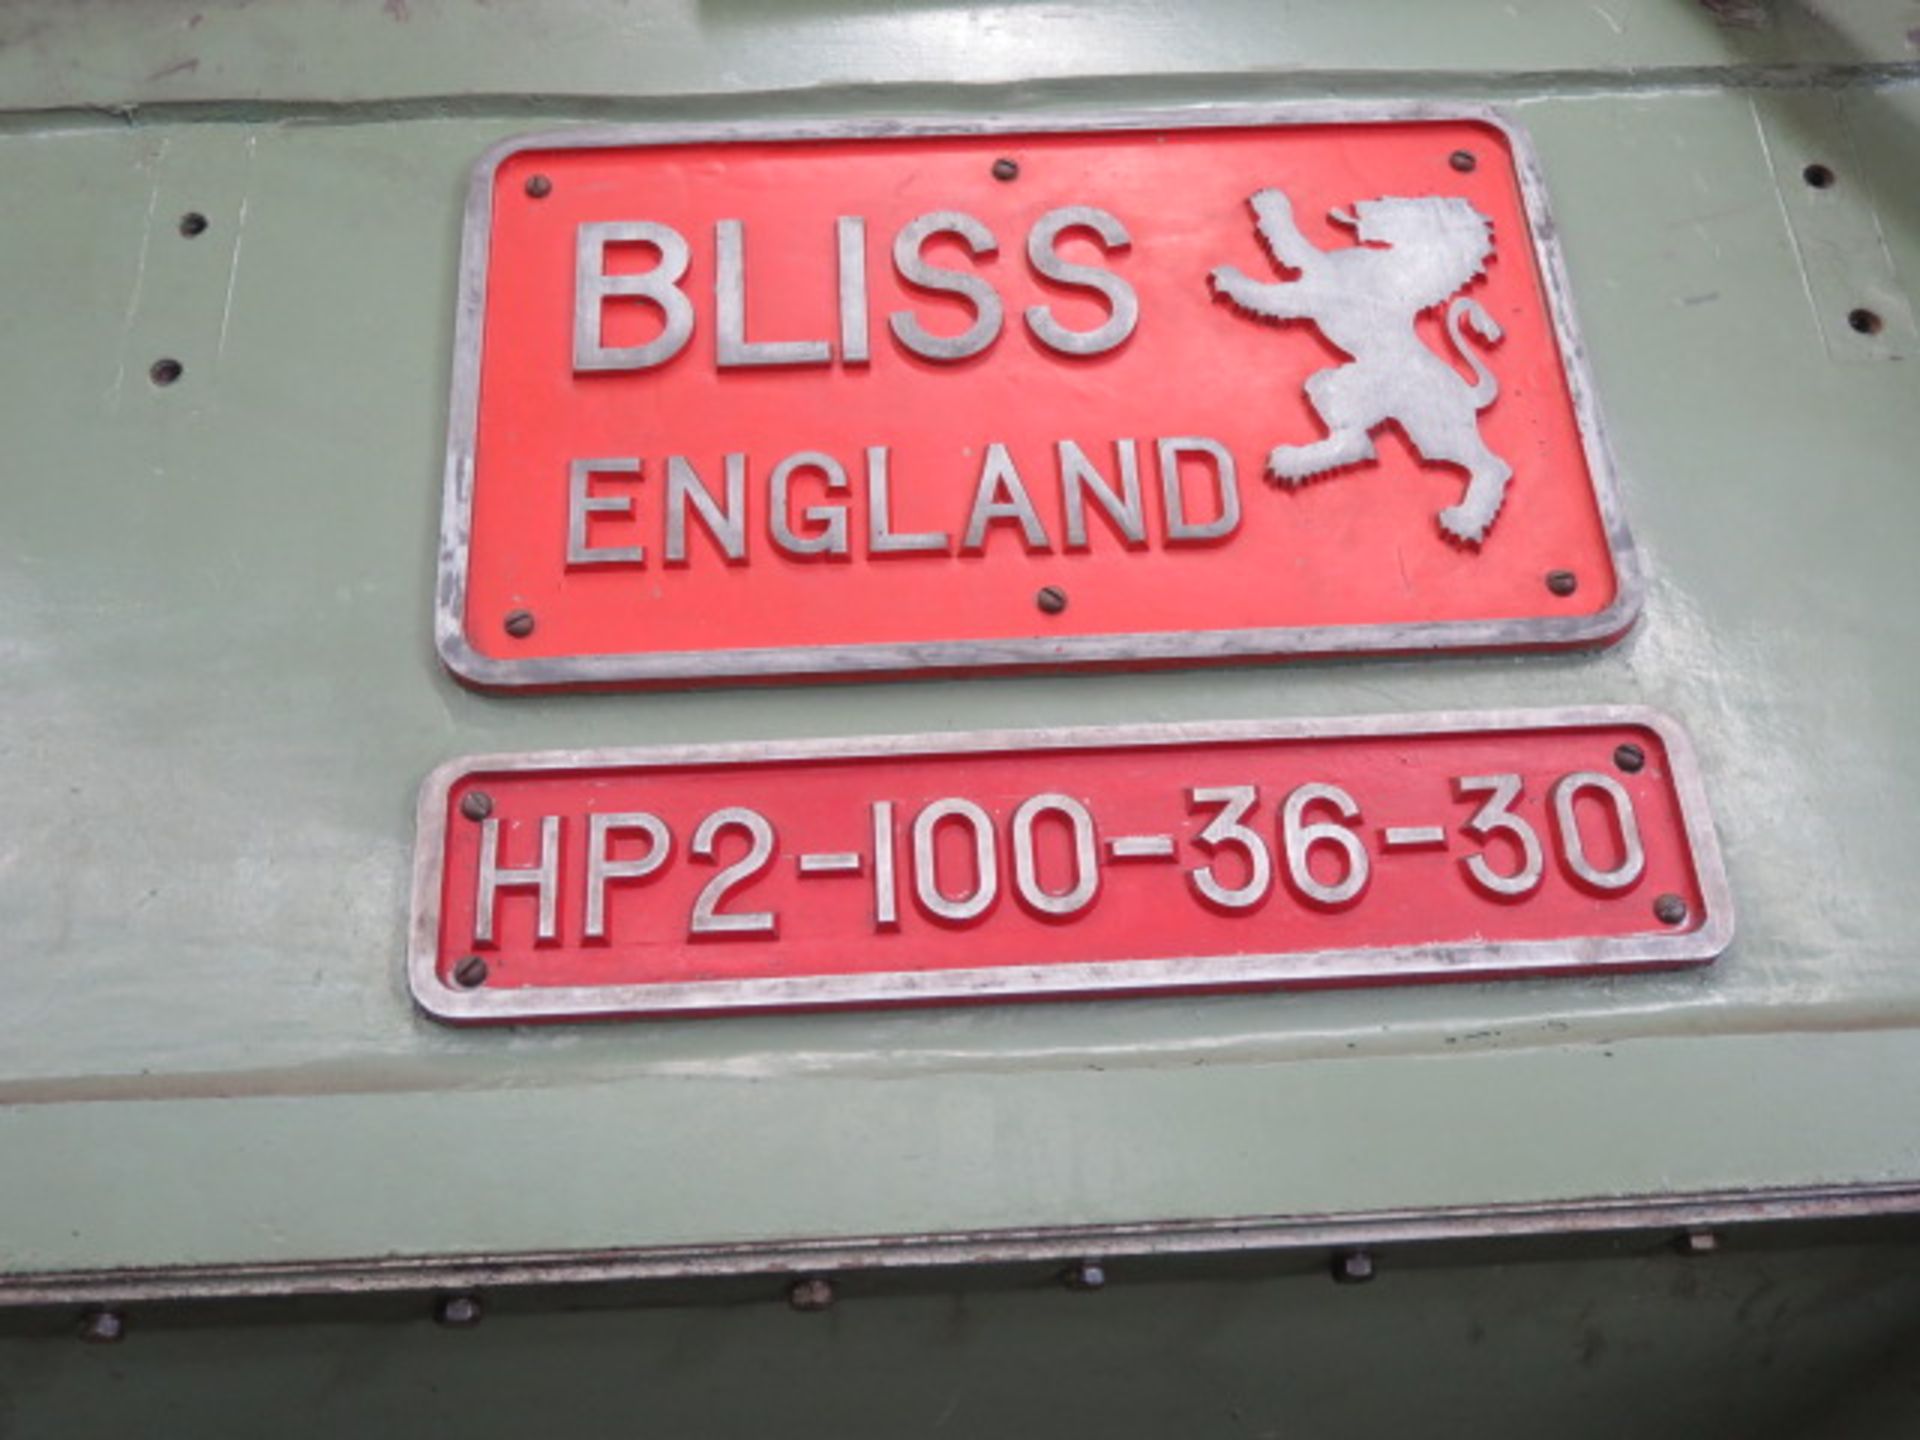 Bliss HP2-100-36-30 High Speed Straight Side Double Crank Stamping Press s/n B356-16481-1966 w/ 5” - Image 10 of 11